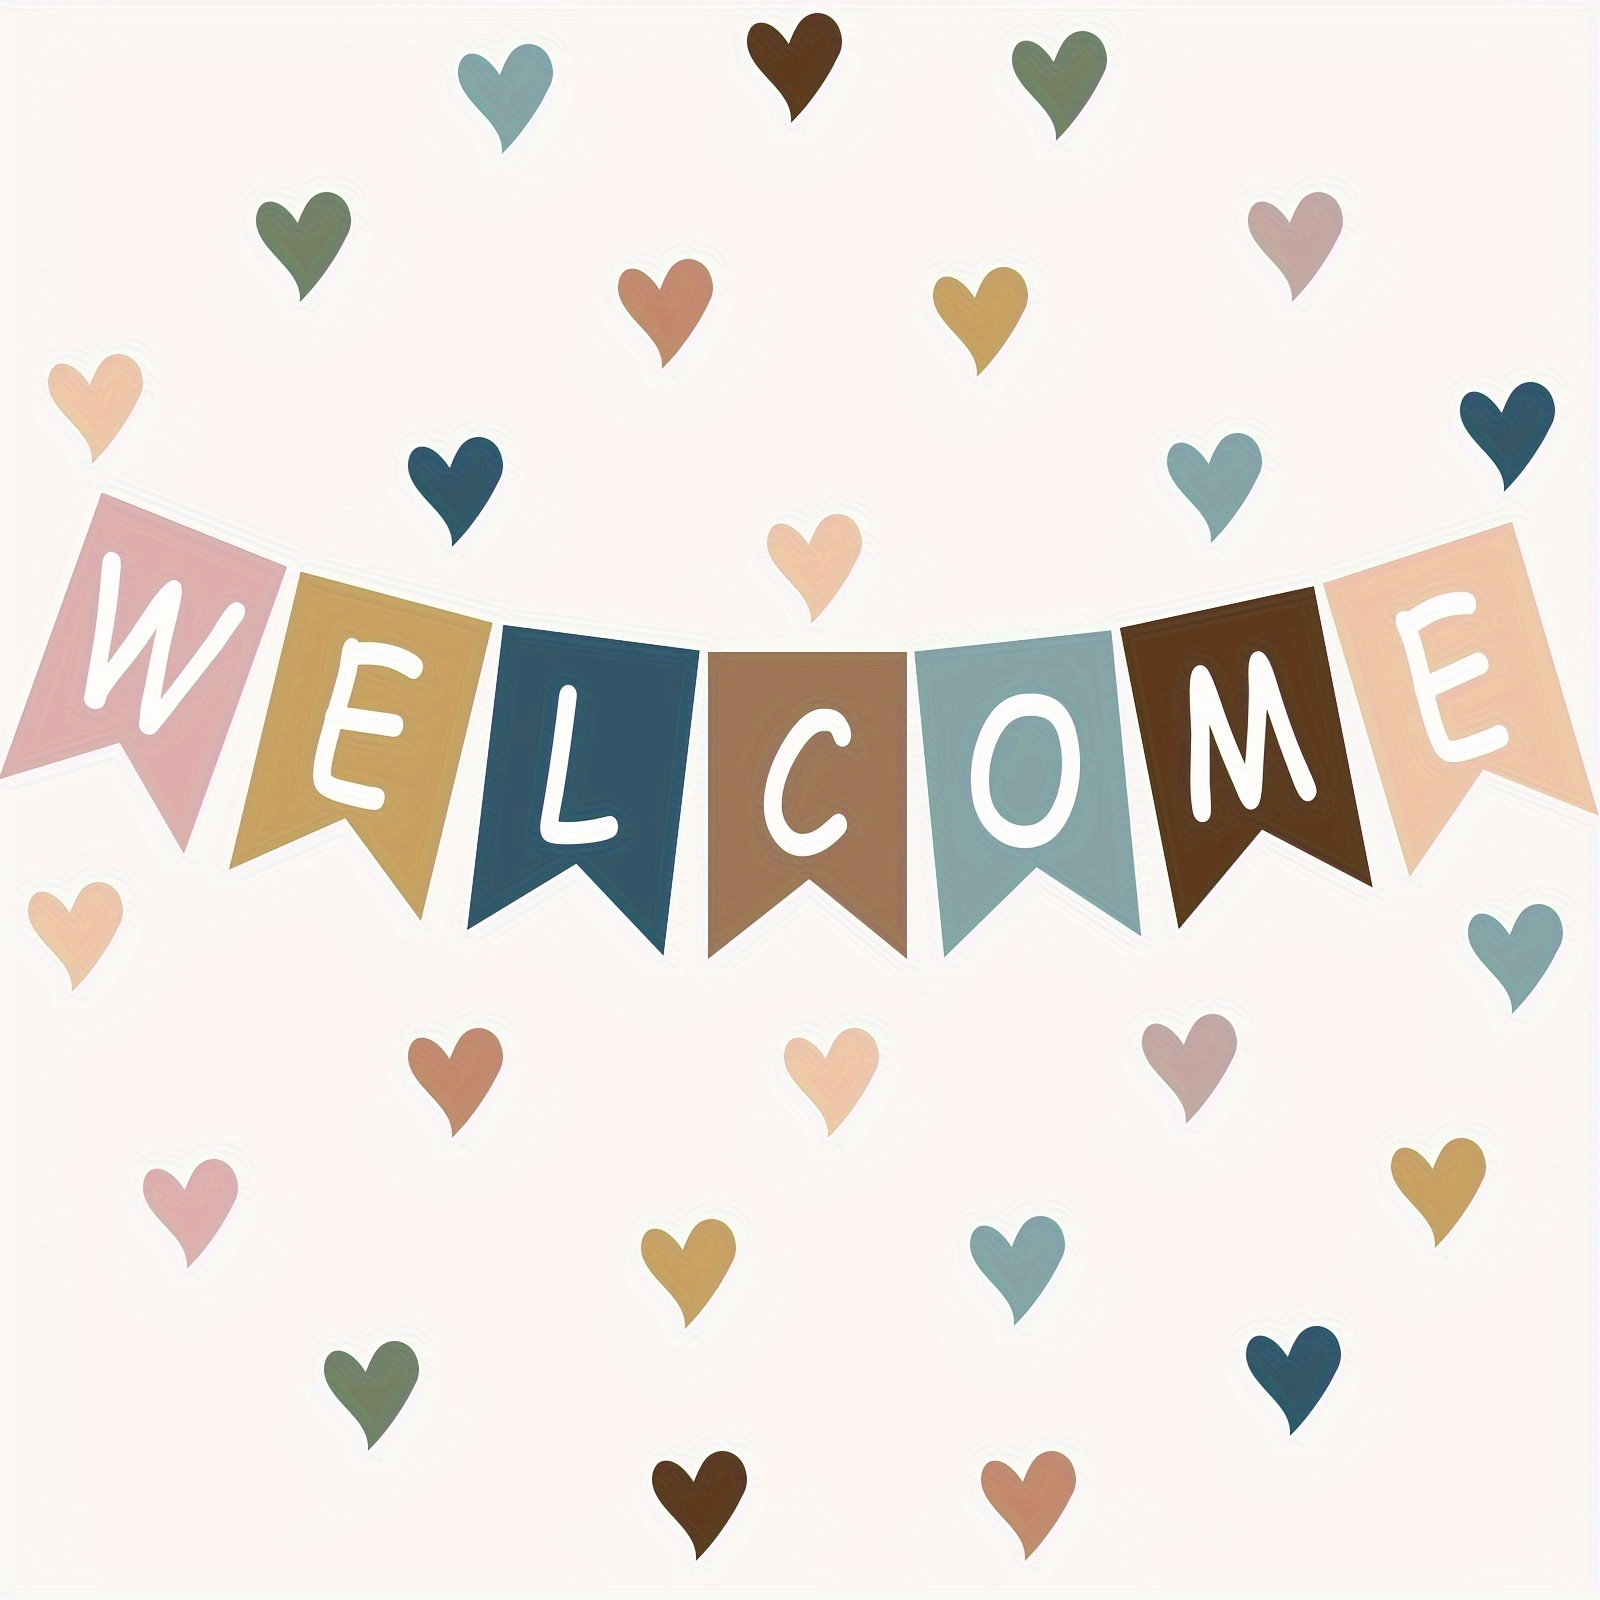 

57pcs Everyone Is Welcome Bulletin Board Classroom Welcome Decors With Hearts Cutouts, Positive Everyone Is Welcome Classroom Theme Bulletin Decorations For School Chalkboards, Wall Decor